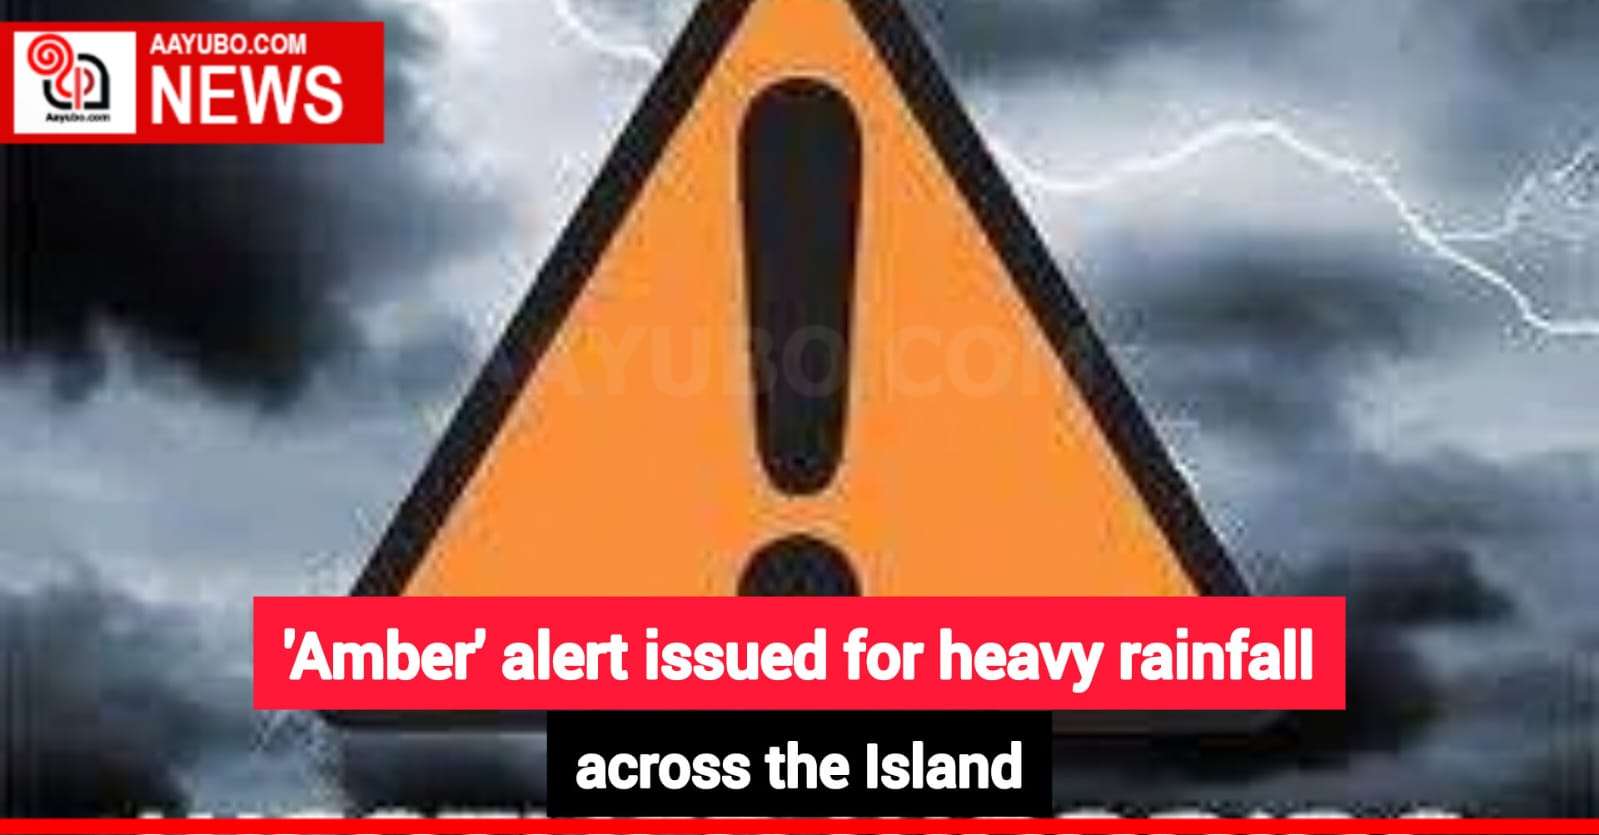 'Amber' alert issued for heavy rainfall across the Island